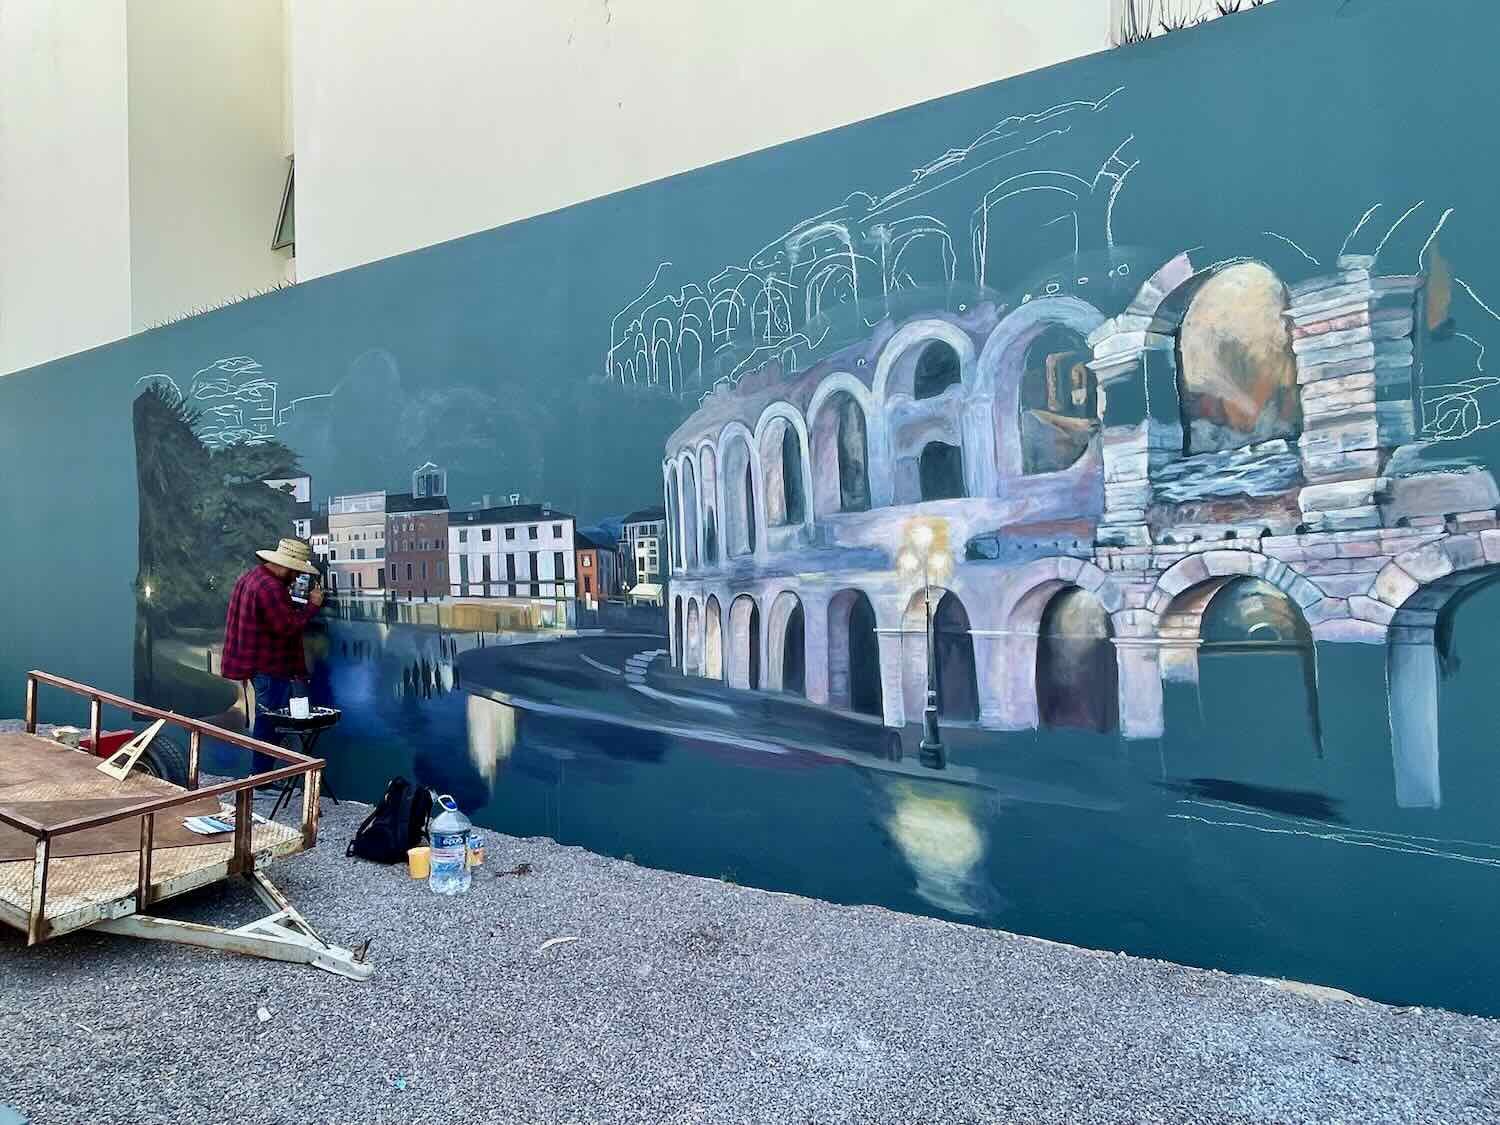 A new mural being created, depicting the Roman Colosseum